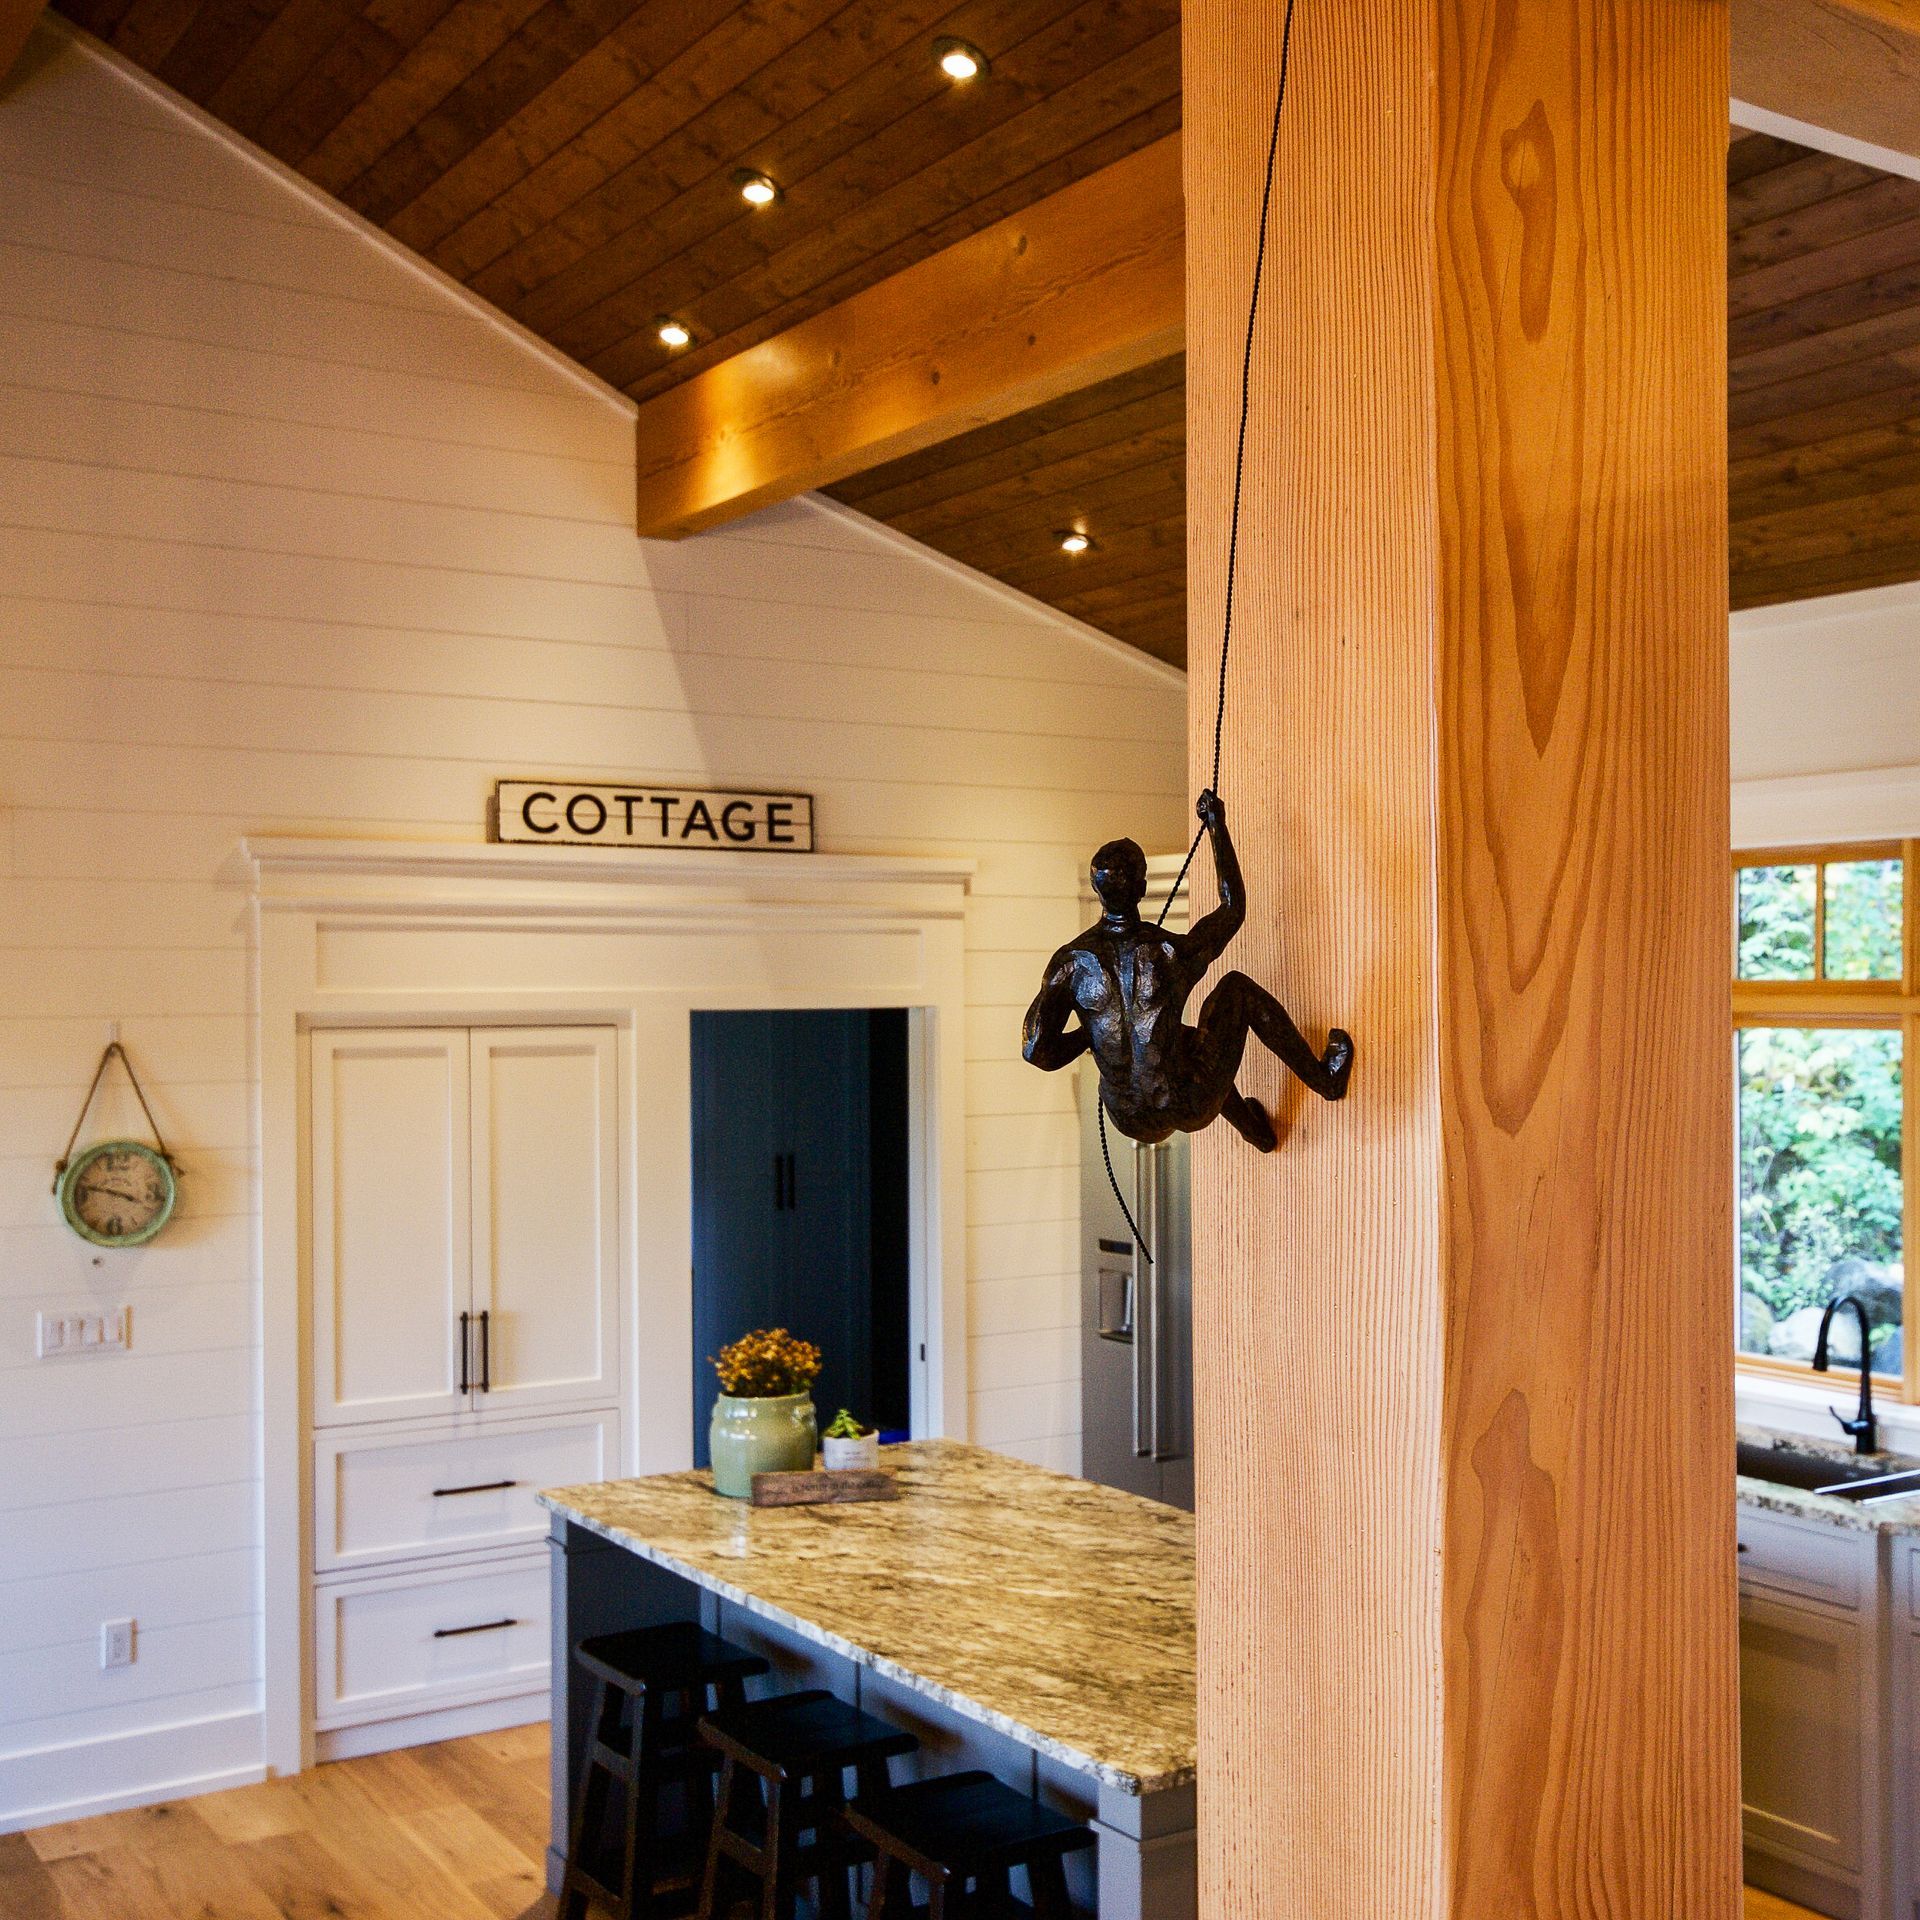 Sloped wood ceiling and visible timber posts in a Muskoka Cottage.